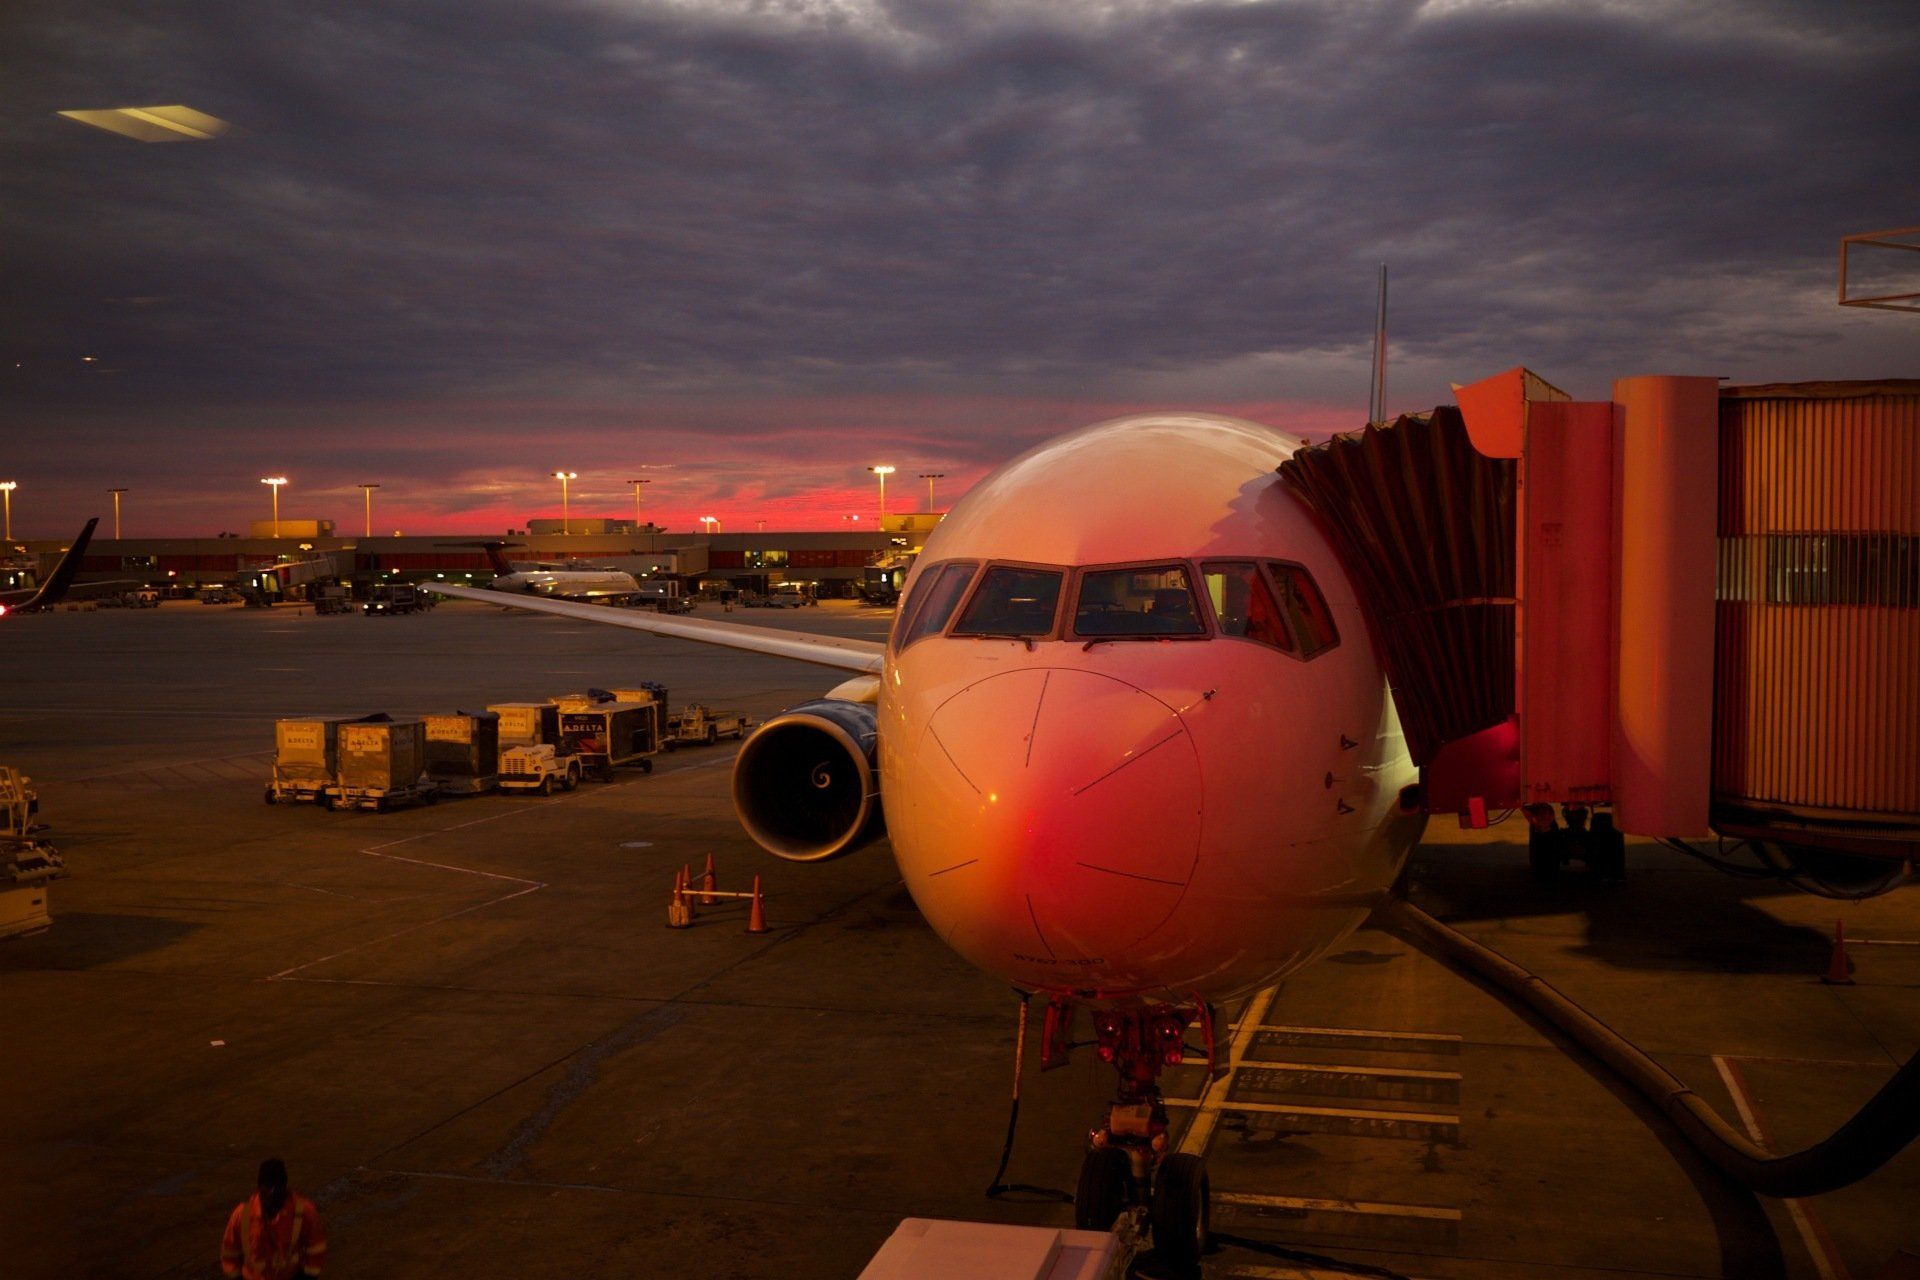 An airplane is parked at an airport at sunset